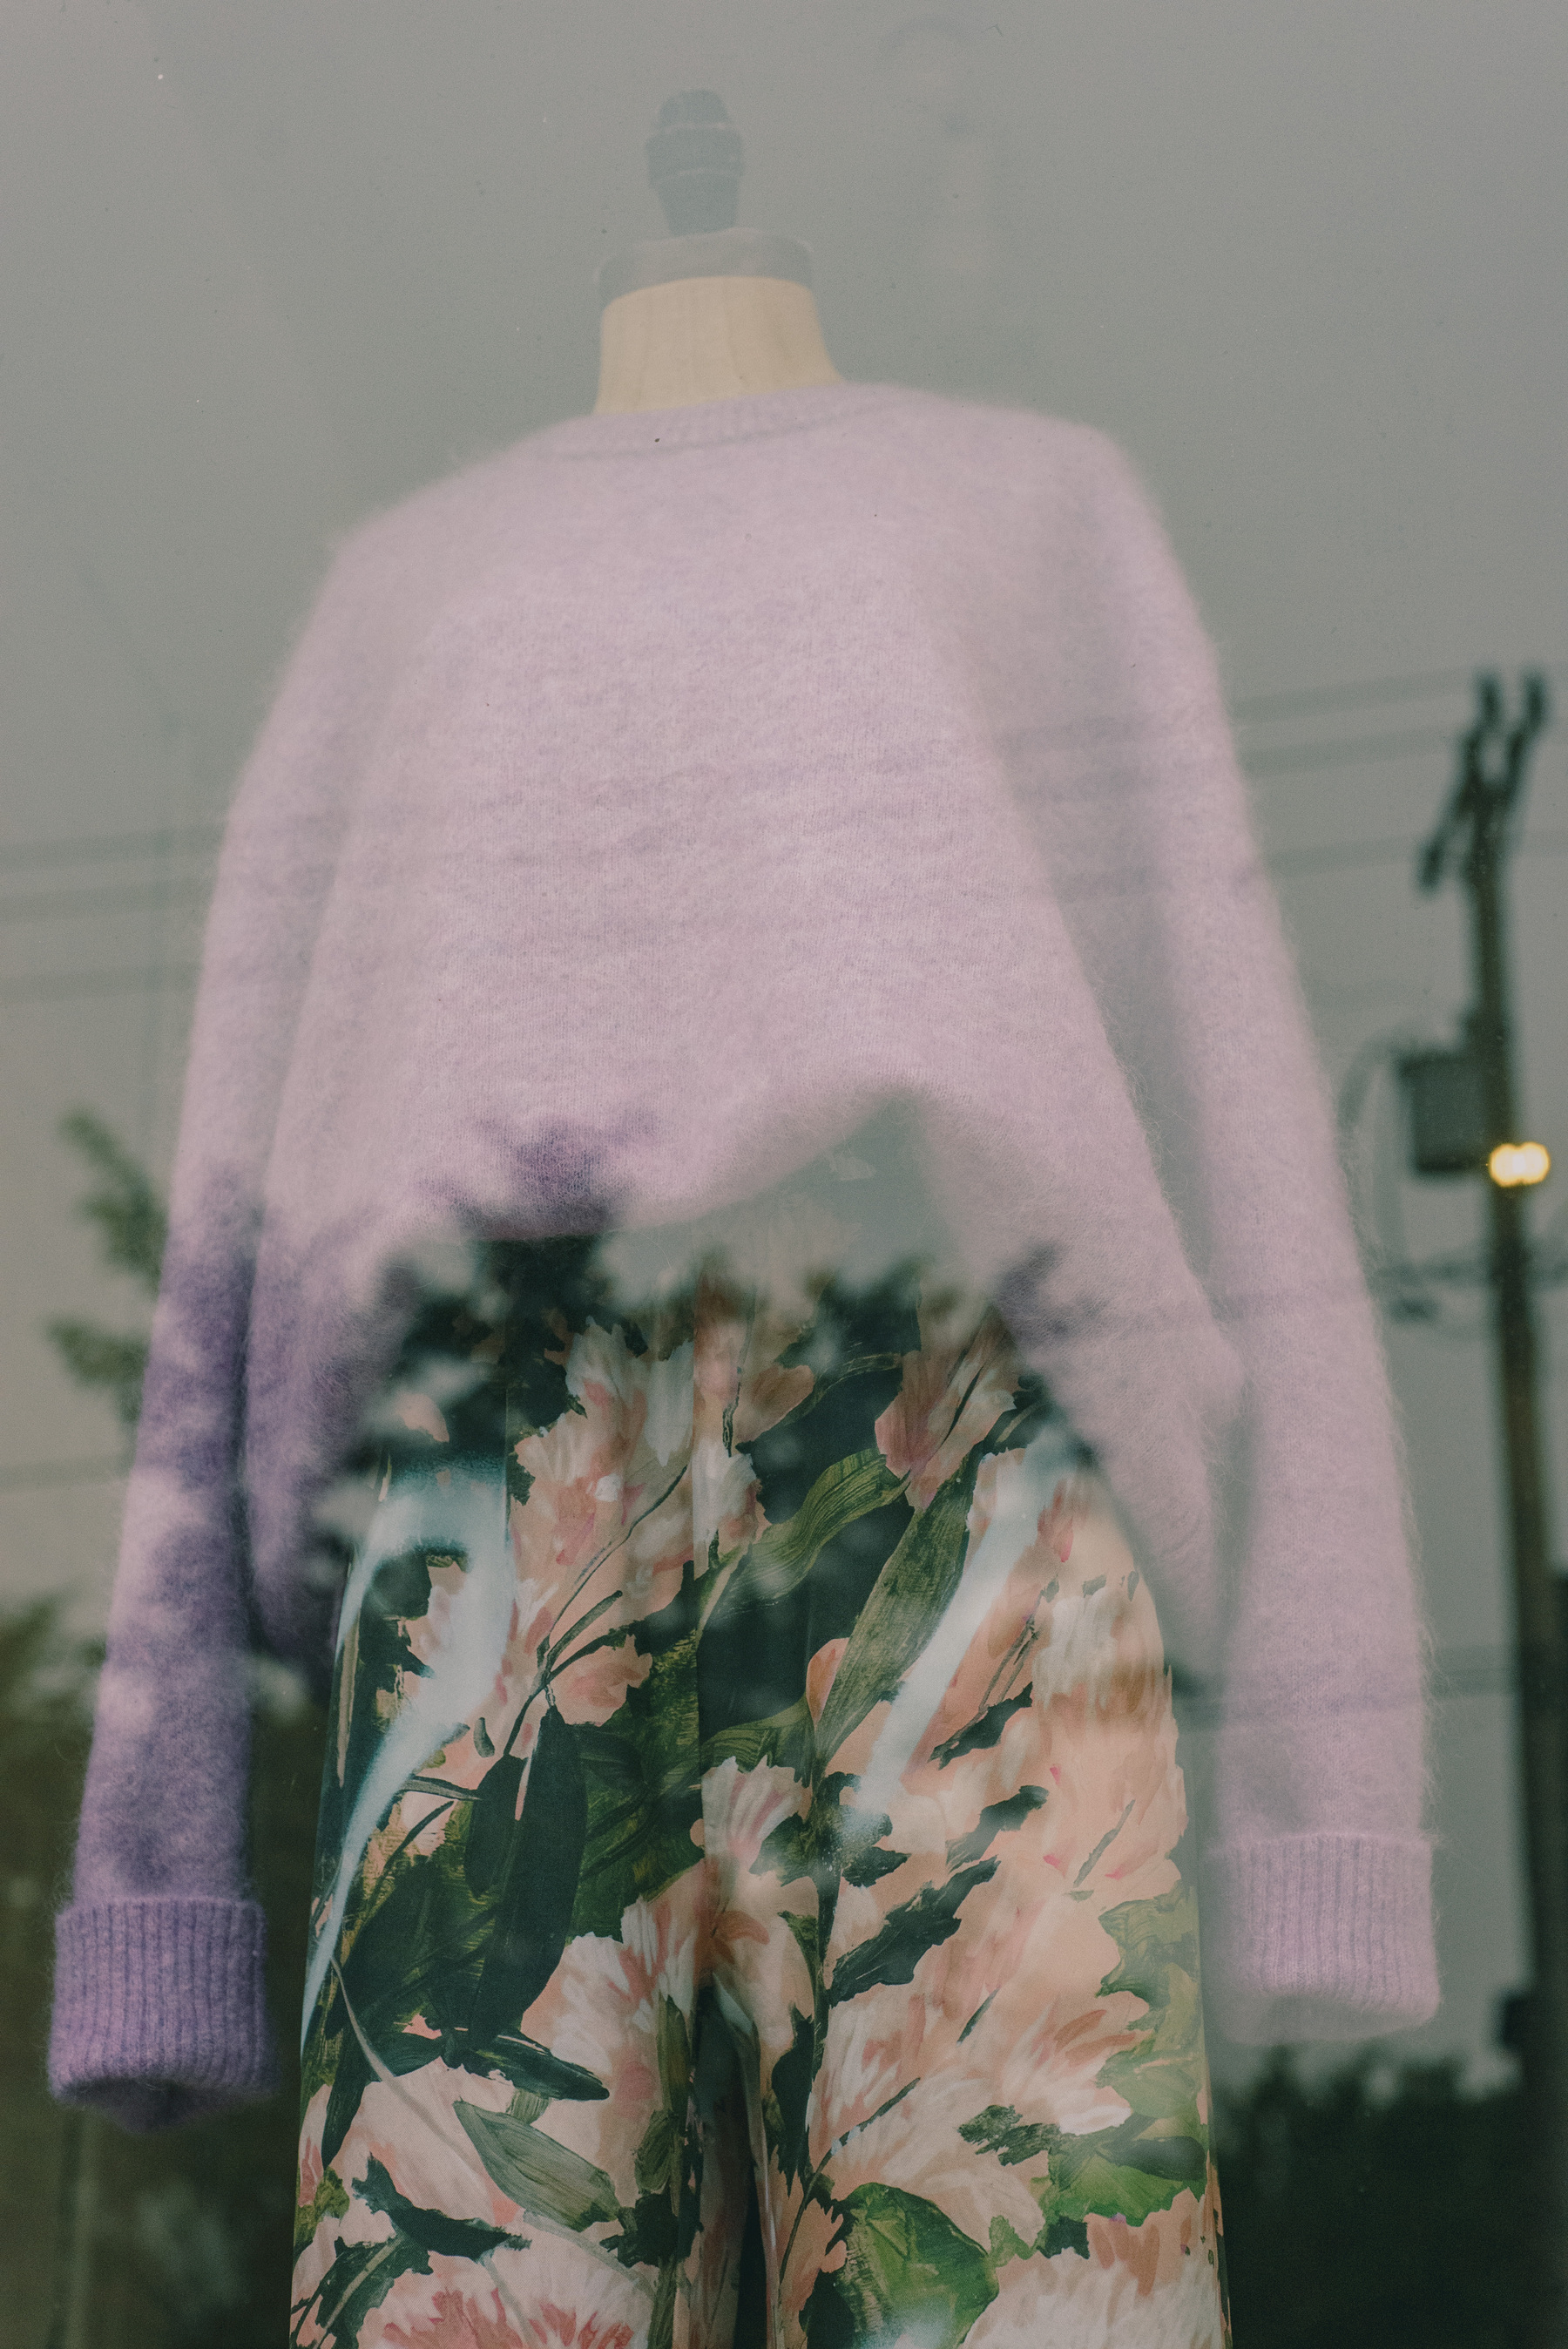 Women’s pink sweater and botanical print fabric pants on a mannequin in a shop building. Wires and trees reflected in window overlayed.